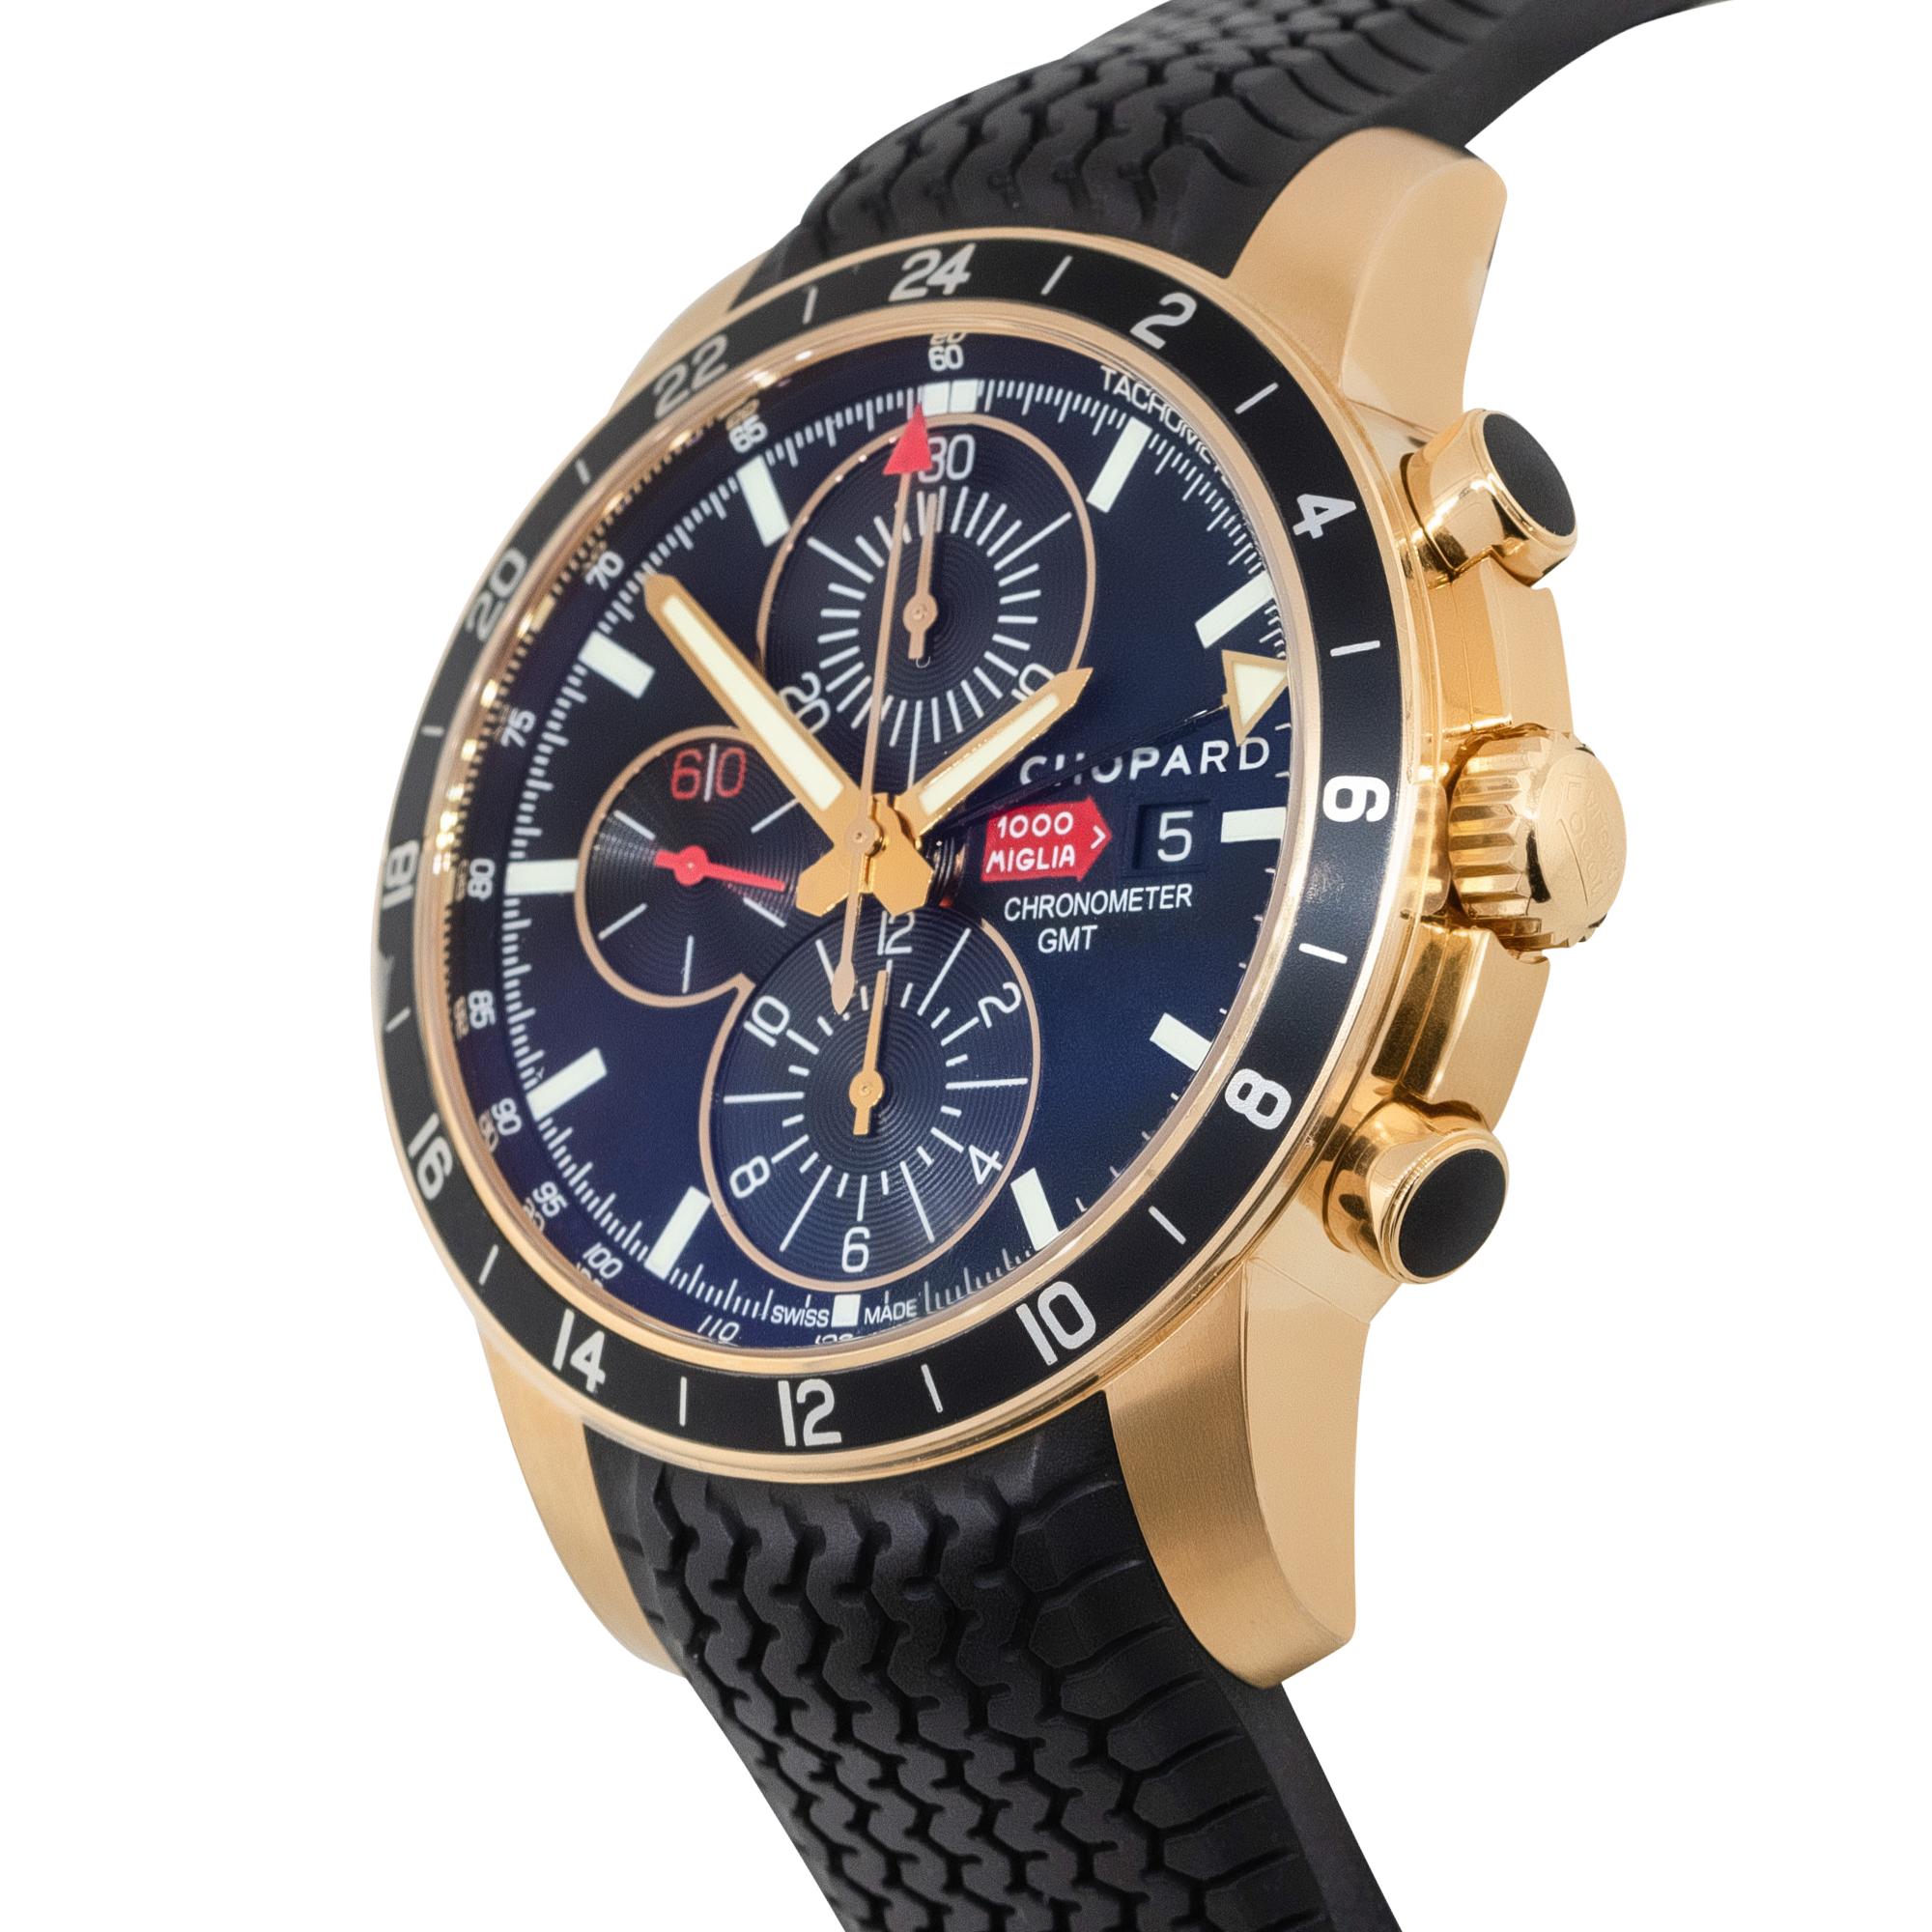 Chopard 161288 Mille Miglia 18k Rose Gold Black Dial Watch In New Condition For Sale In Boca Raton, FL